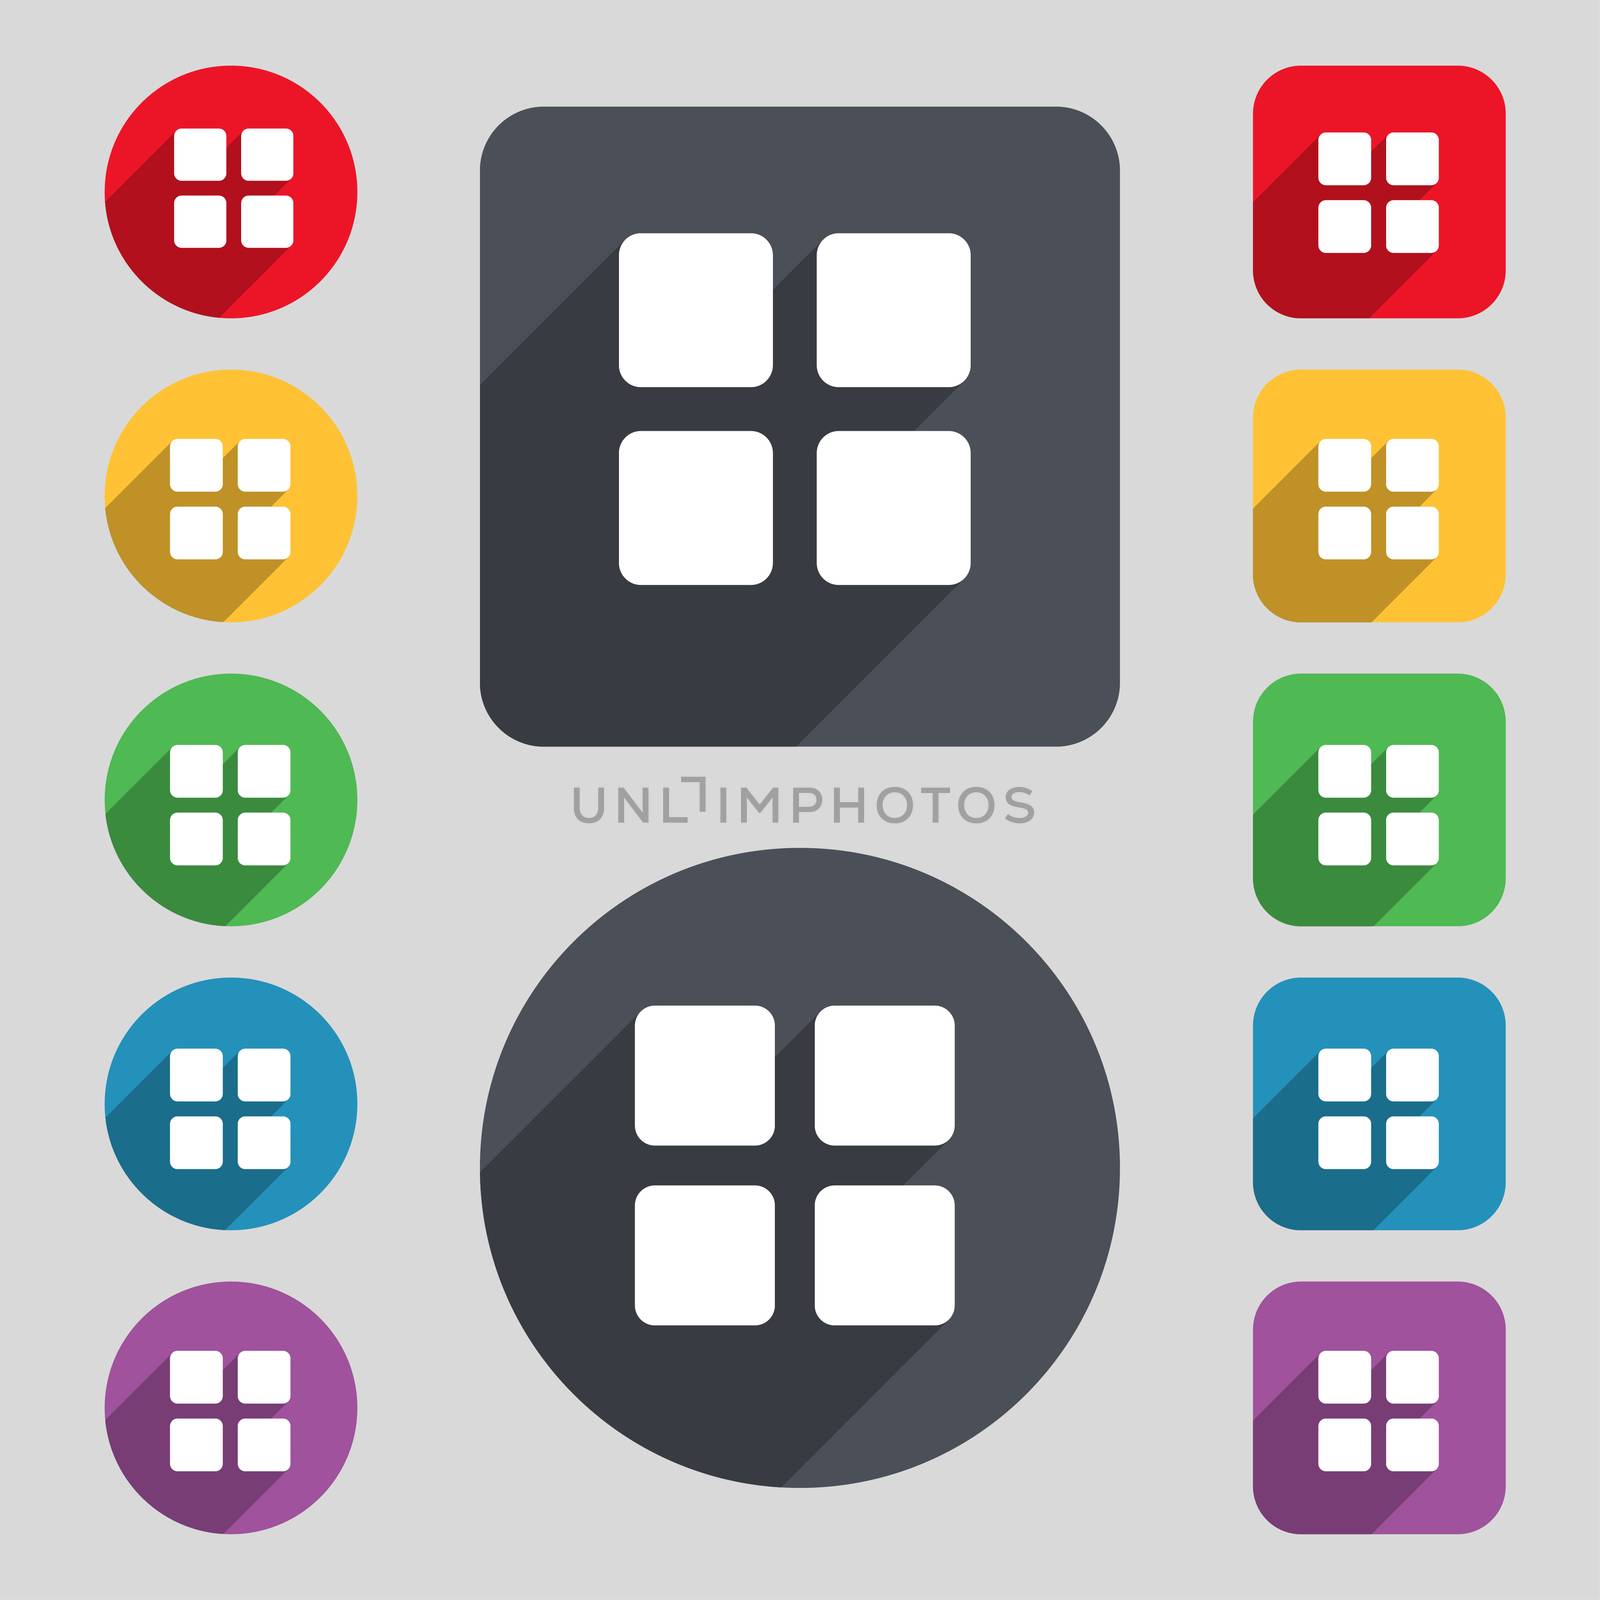 List menu, Content view options icon sign. A set of 12 colored buttons and a long shadow. Flat design. illustration